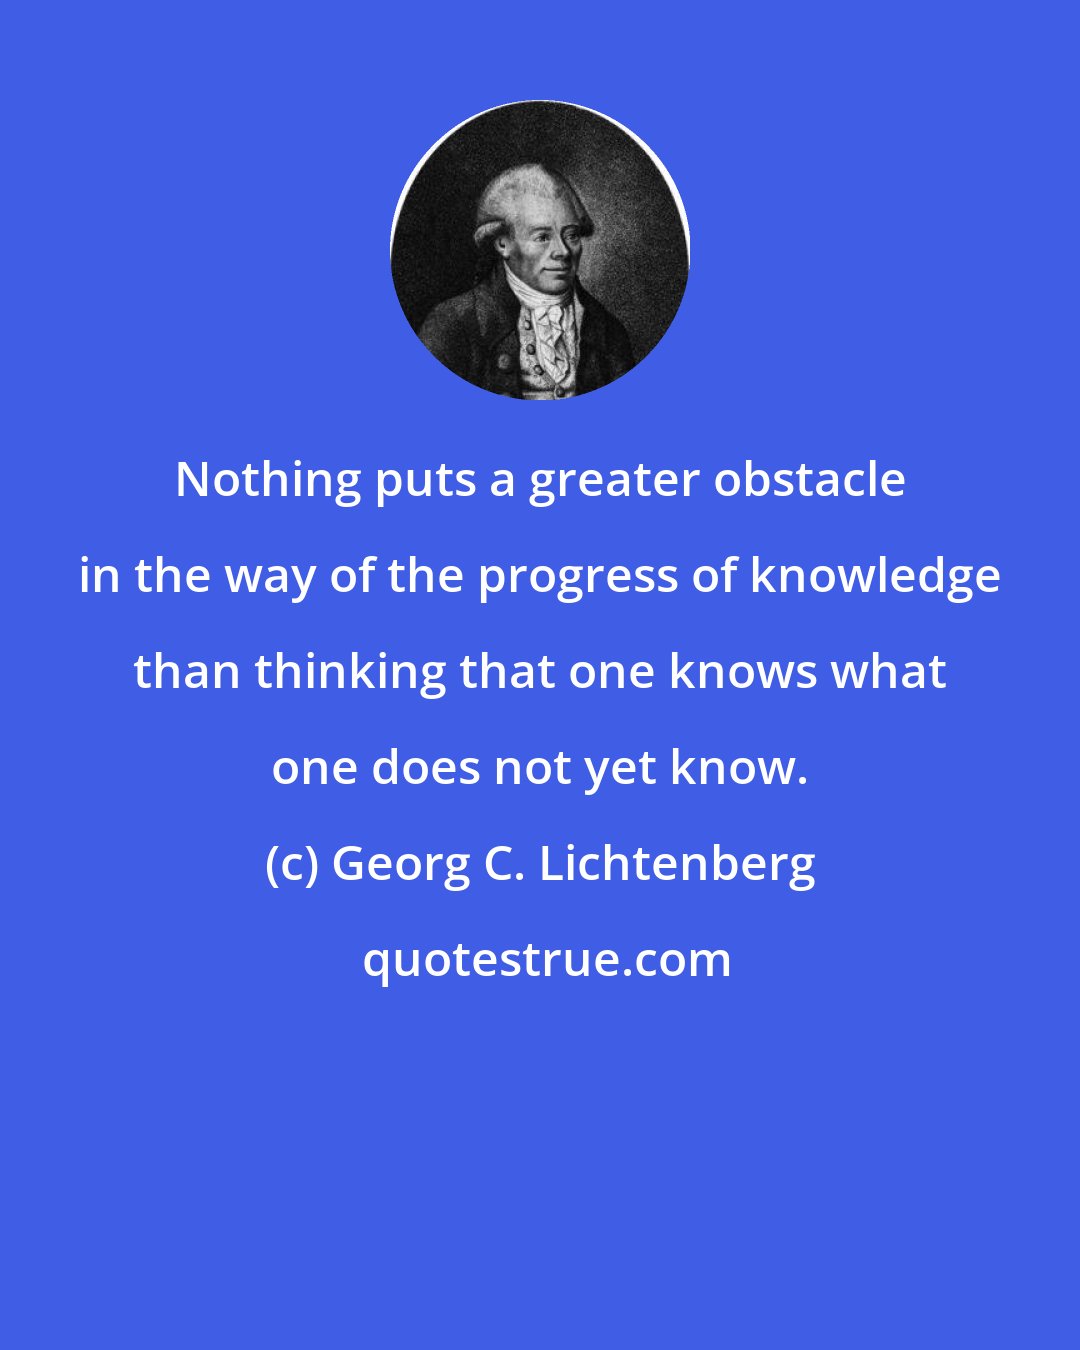 Georg C. Lichtenberg: Nothing puts a greater obstacle in the way of the progress of knowledge than thinking that one knows what one does not yet know.